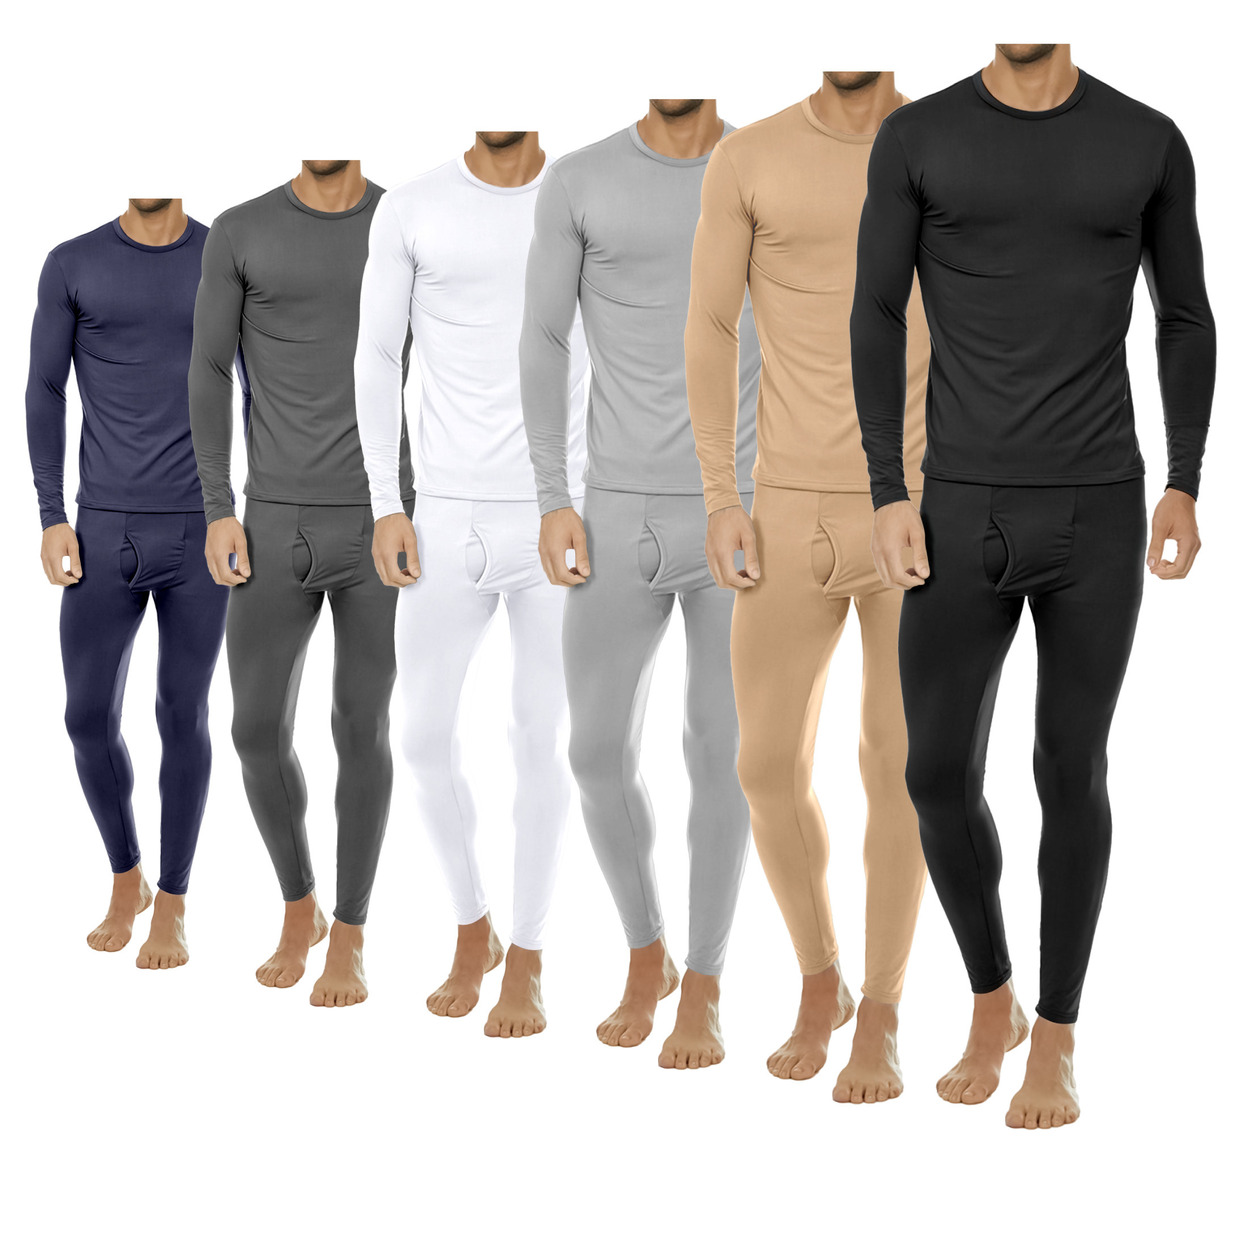 2-Sets: Men's Winter Warm Fleece Lined Thermal Underwear Set For Cold Weather - Navy&navy, Small